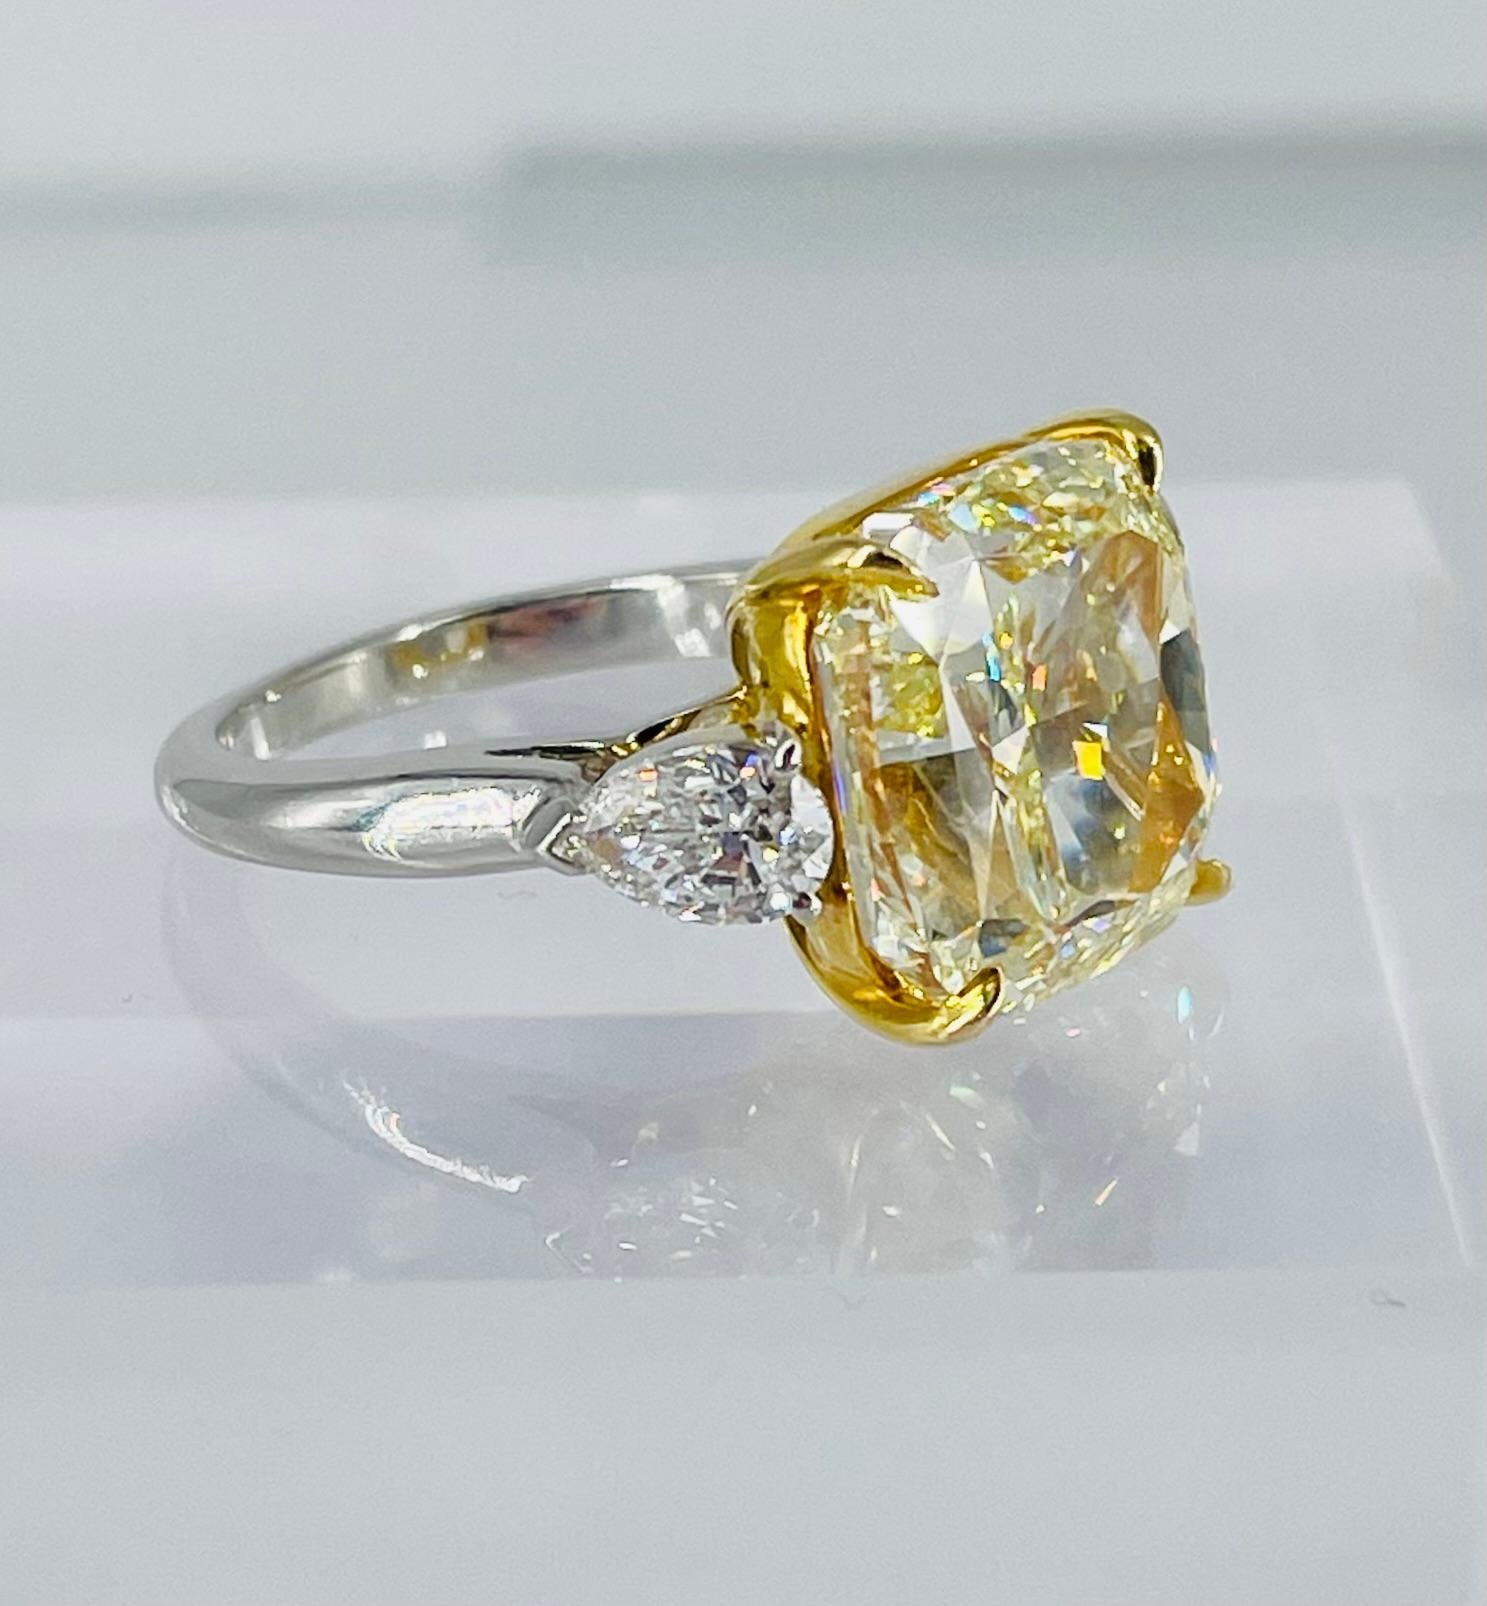 This gorgeous piece of sunshine is a showstopper! This GIA certified 13.05 carat Fancy Yellow cushion shape diamond is a vibrant yellow with brilliant sparkle. The center diamond is set in 18K yellow gold so the prongs will disappear against the